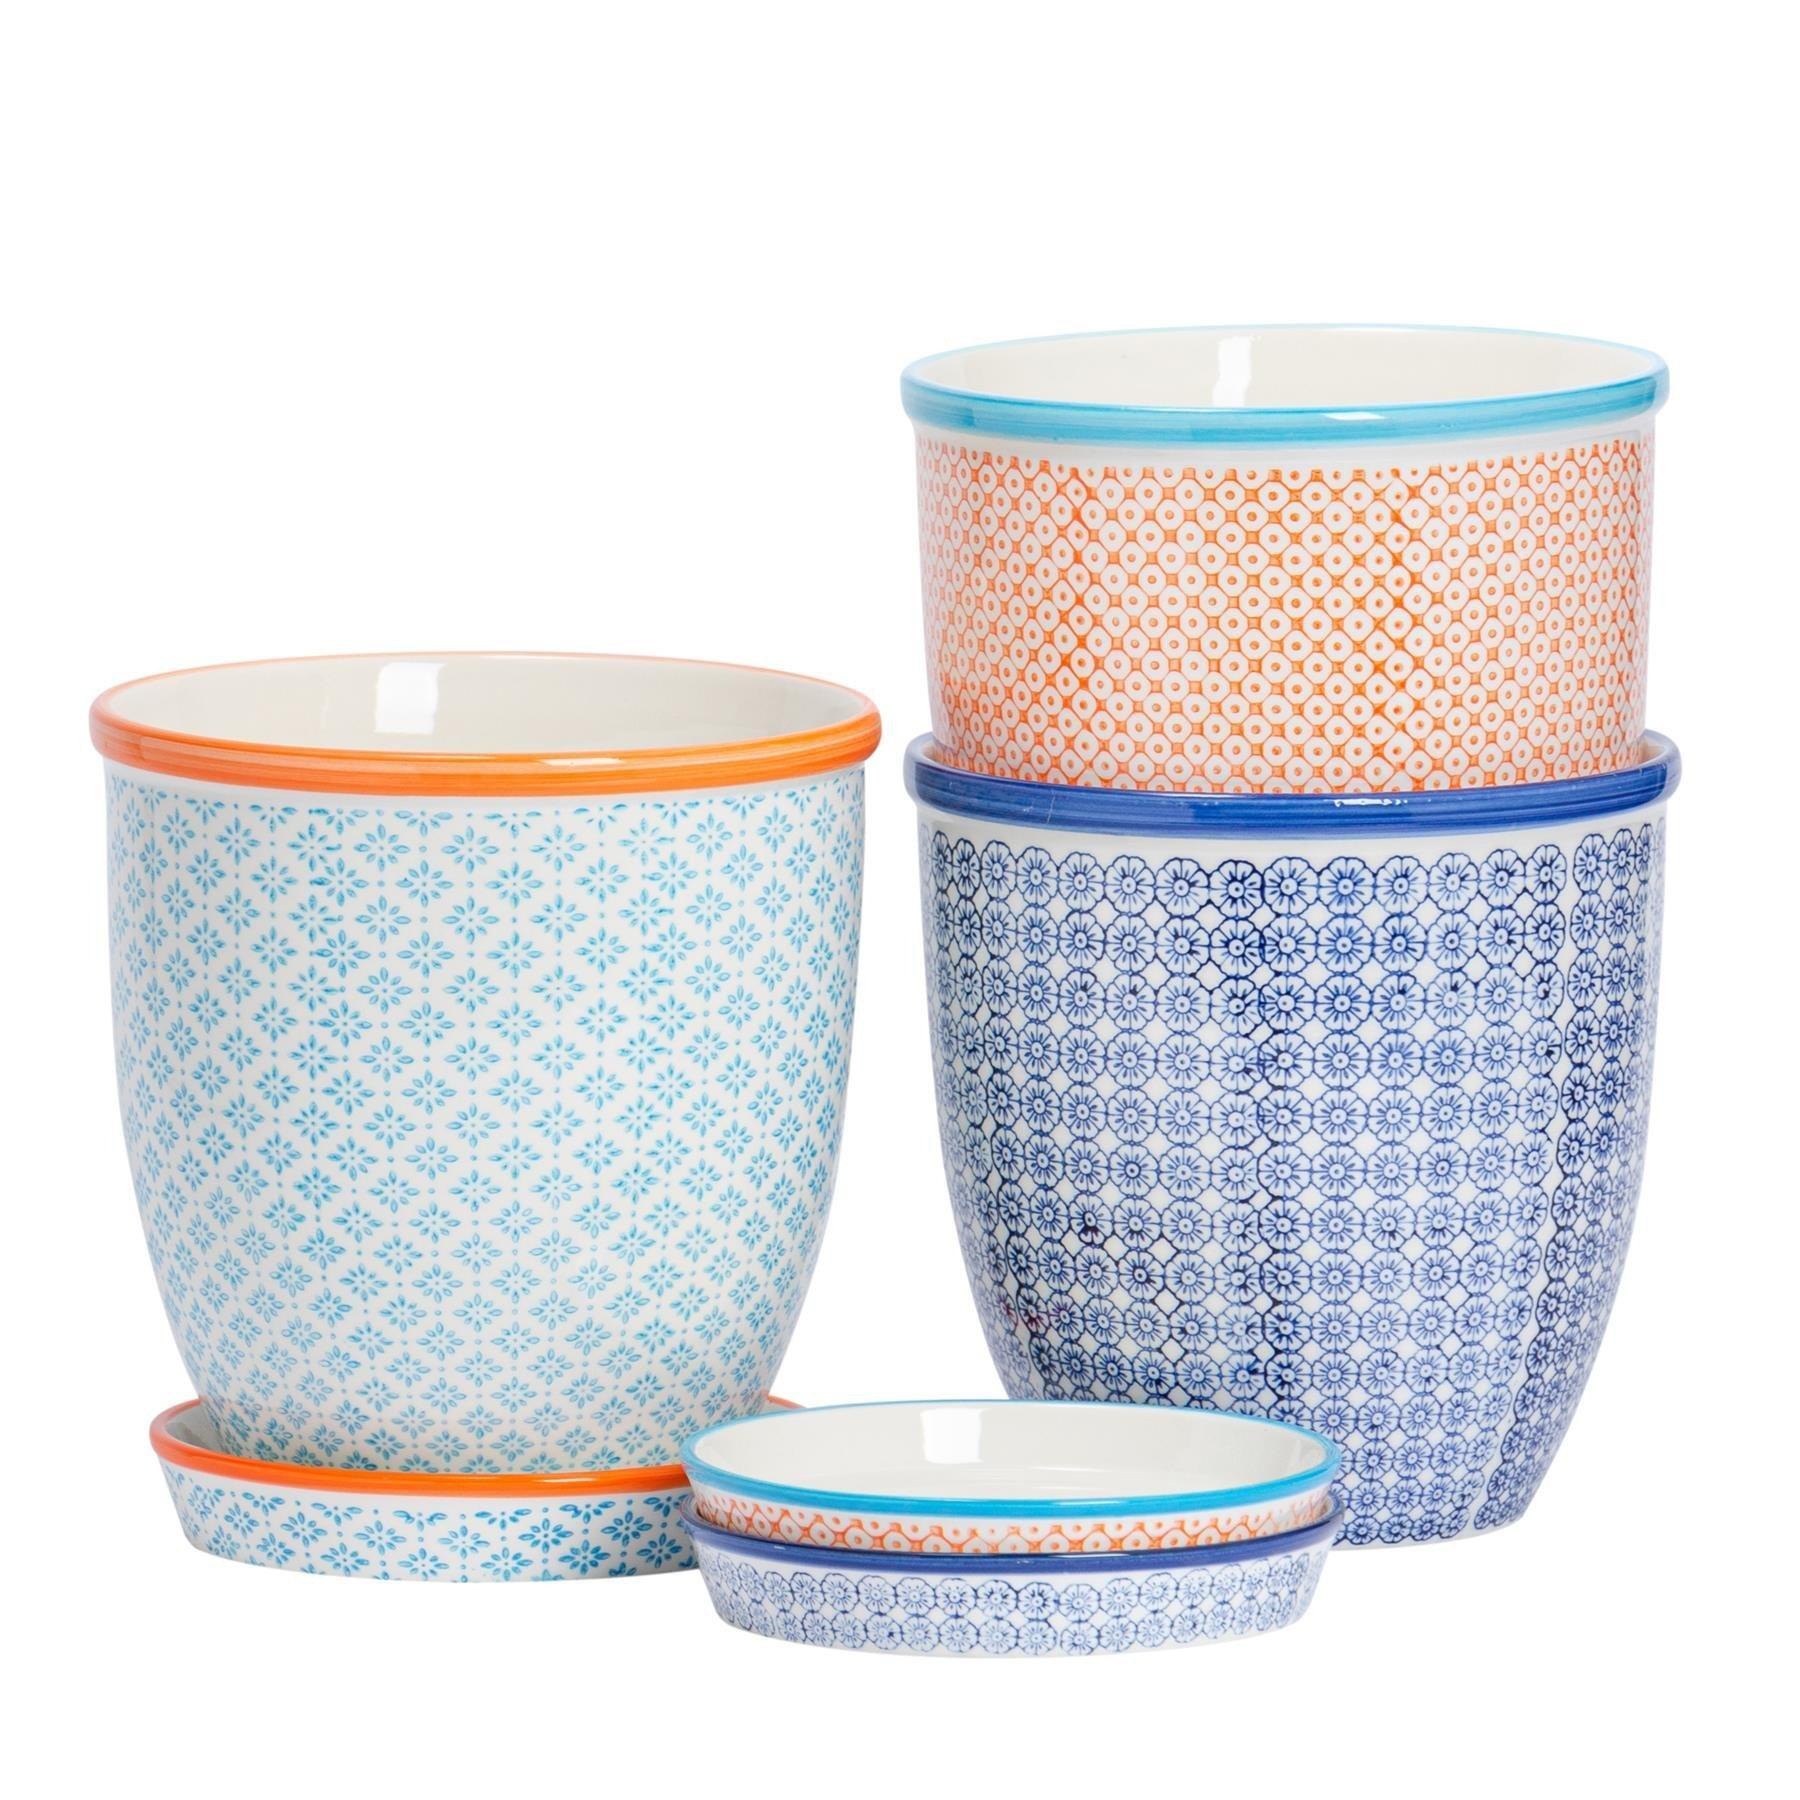 Hand-Printed Plant Pots with Saucers 20.5cm Pack of 3 - image 1